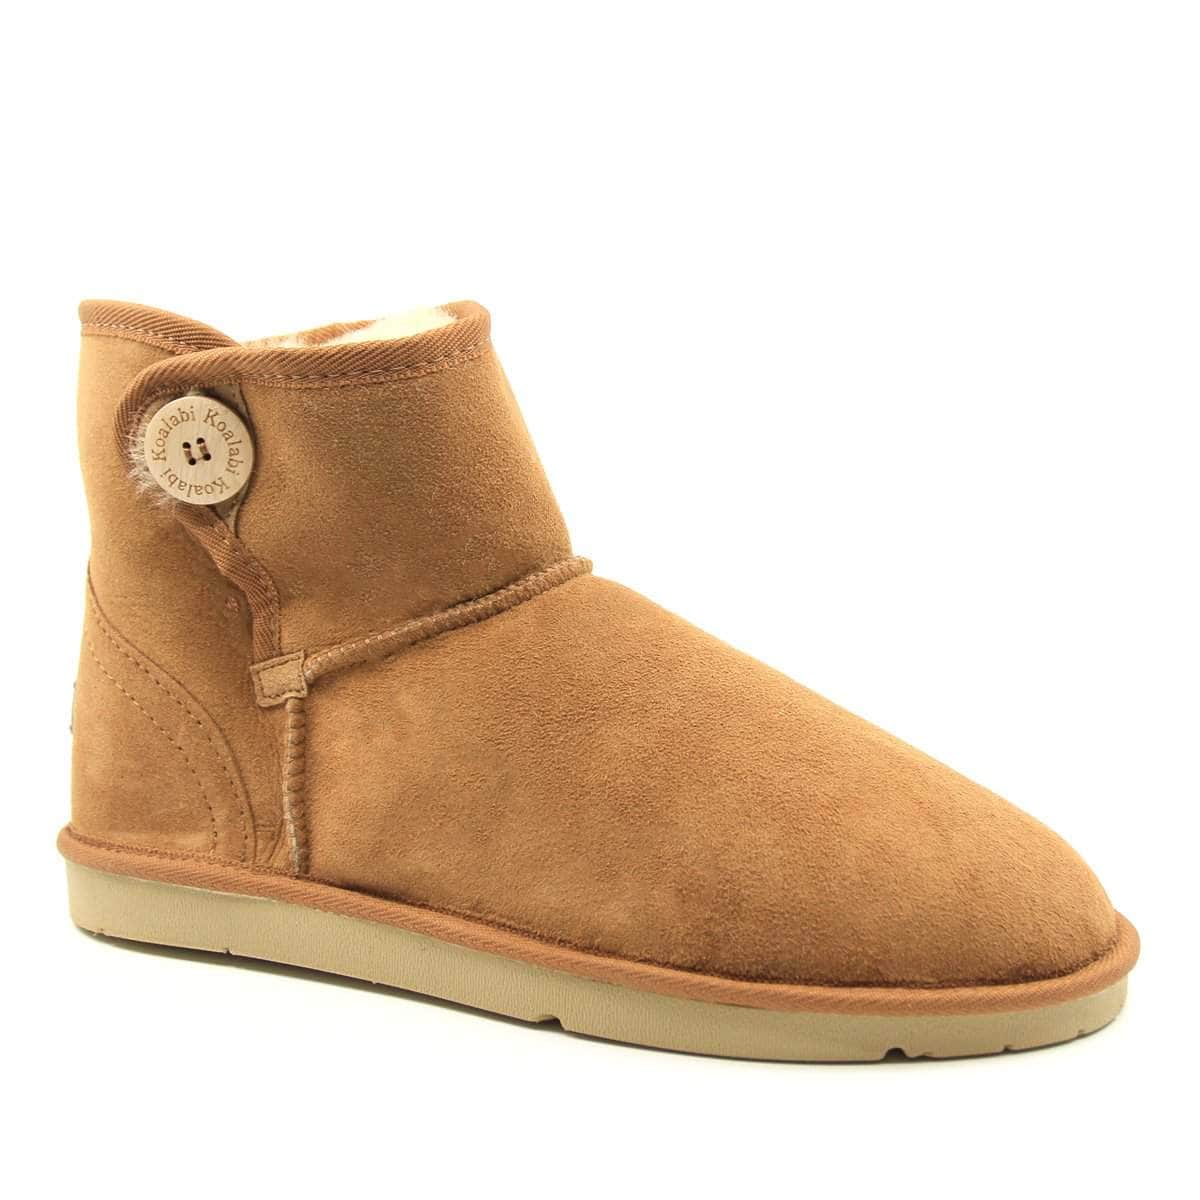 UGG Mini Button Boots